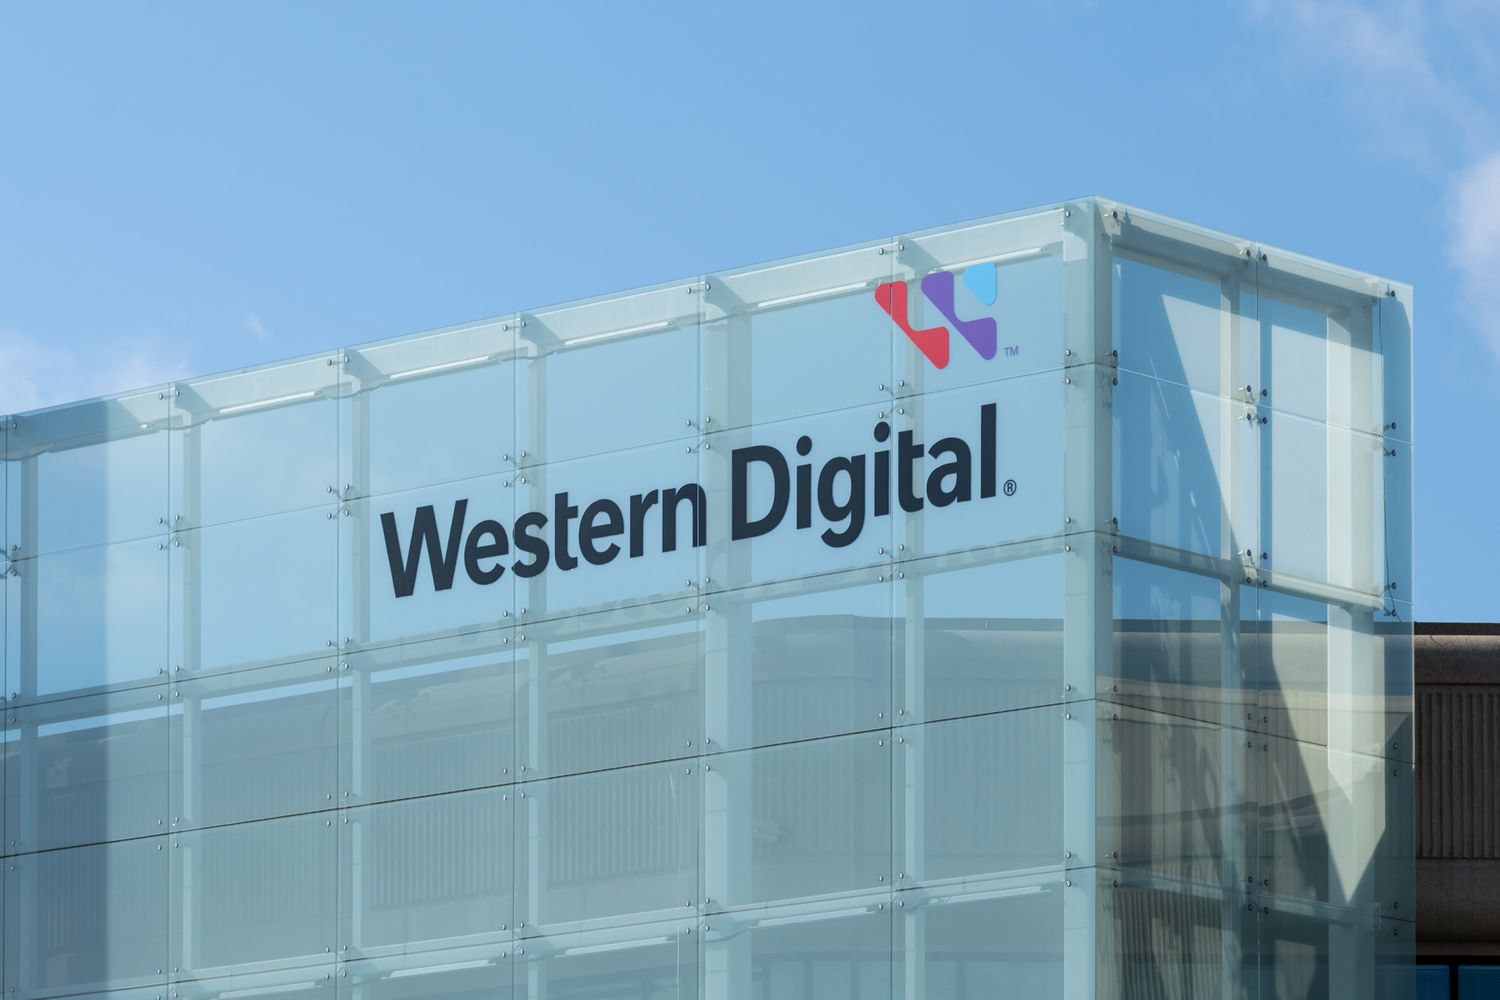 Western Digital Receives Analyst Upgrade on Projected Memory Chip Growth [Video]